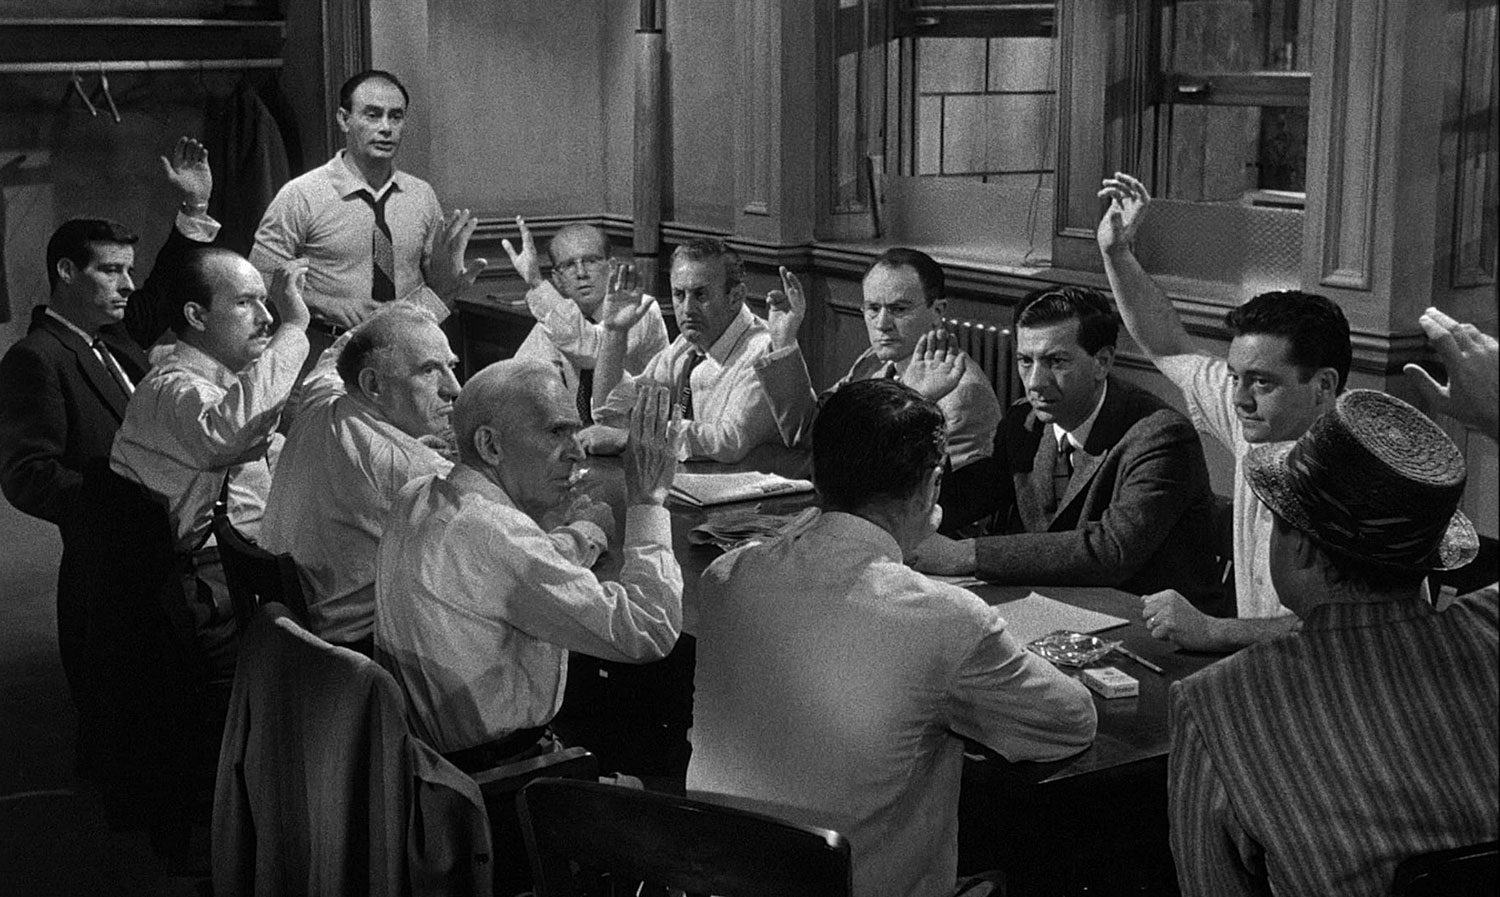 12 Angry Men movie review & analysis (1957)